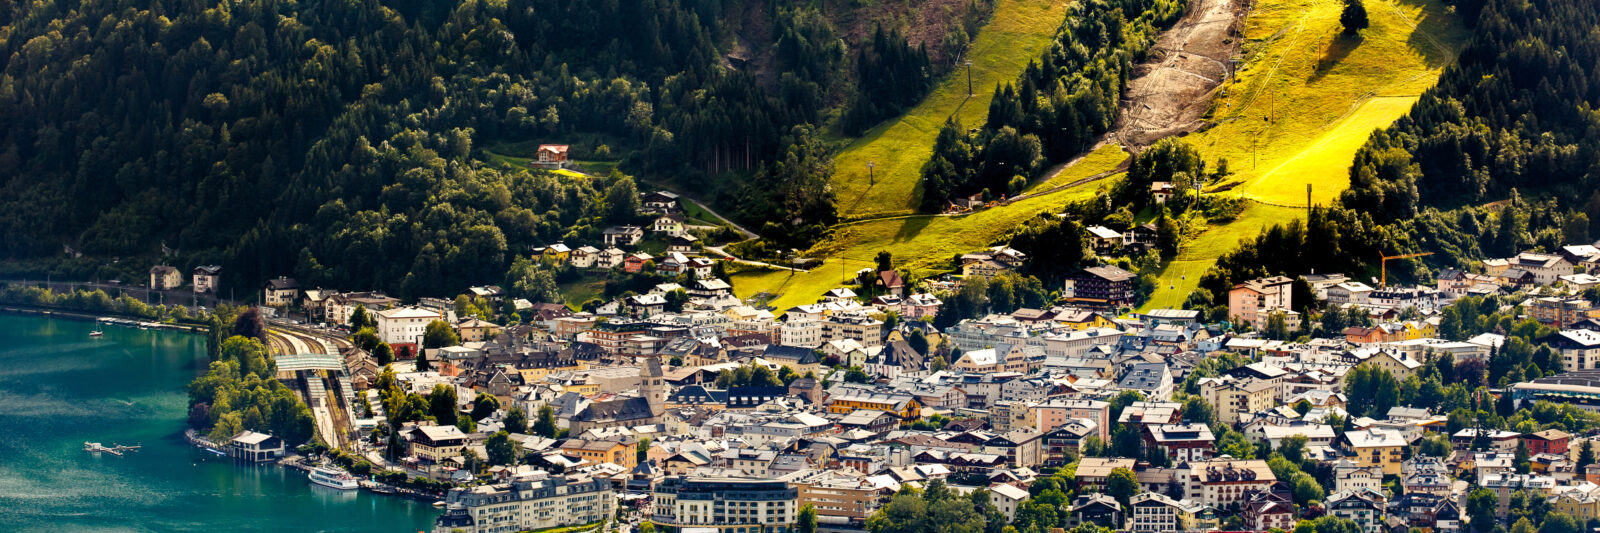 Photo featuring an amazing aerial view of Zell am See. Blue-green water is in the foreground. There are many waterfront resorts seen with just as many homes and buildings behind them. Light green grass is shown on large ski runs going up the mountain side. Dark green trees are on either side.